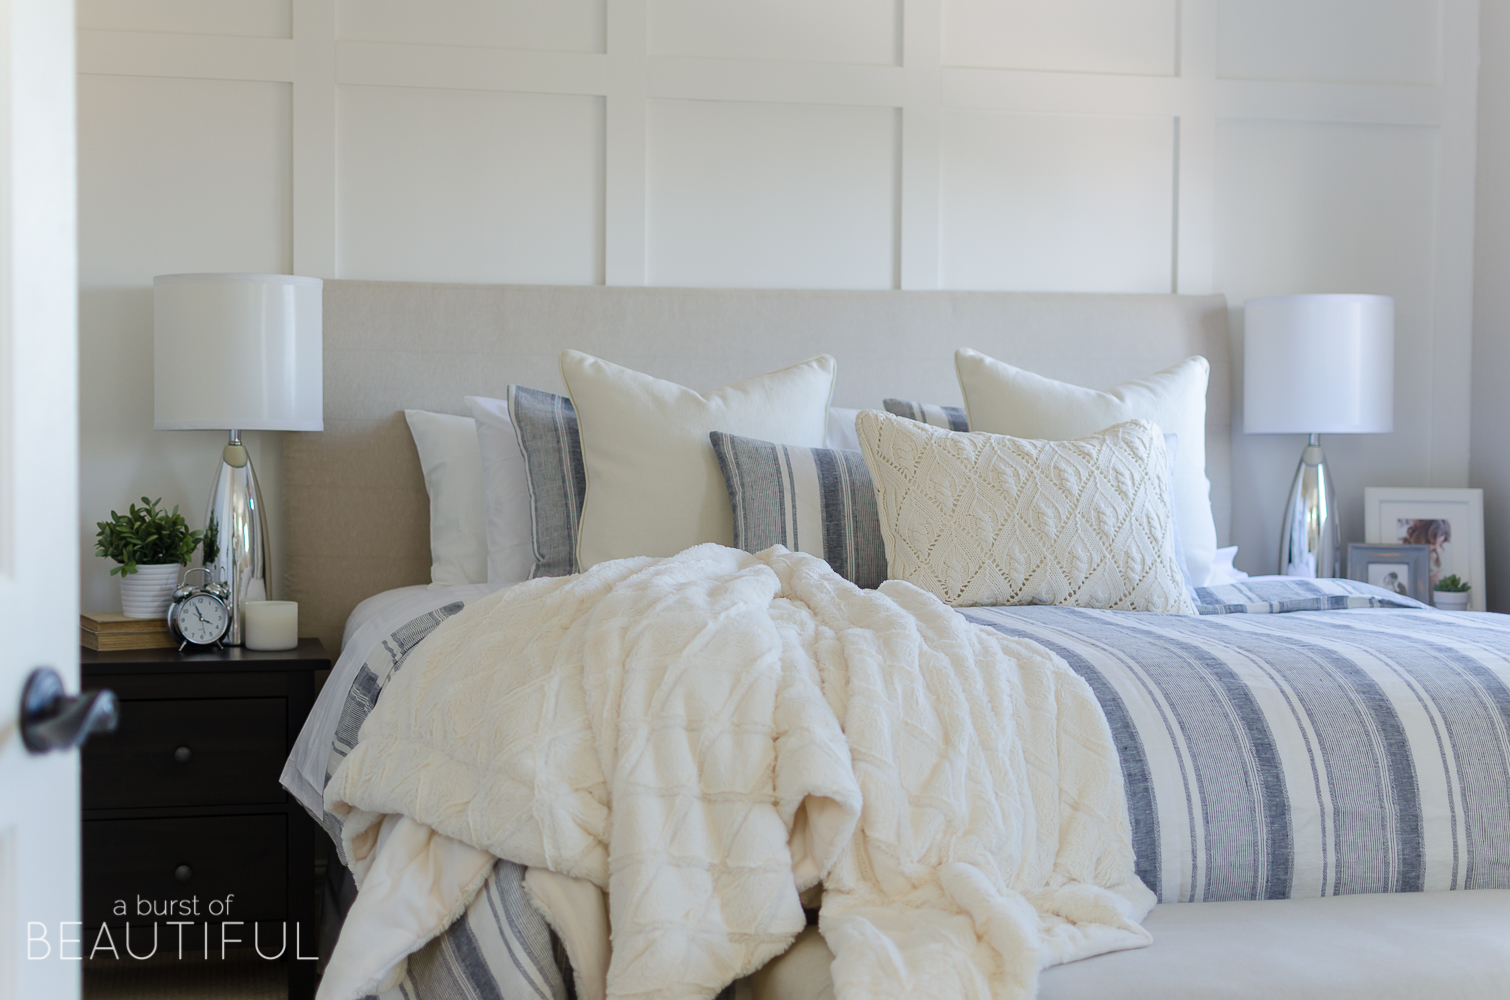 These bedding tips for a beautiful and cozy bed are simple and easy to follow